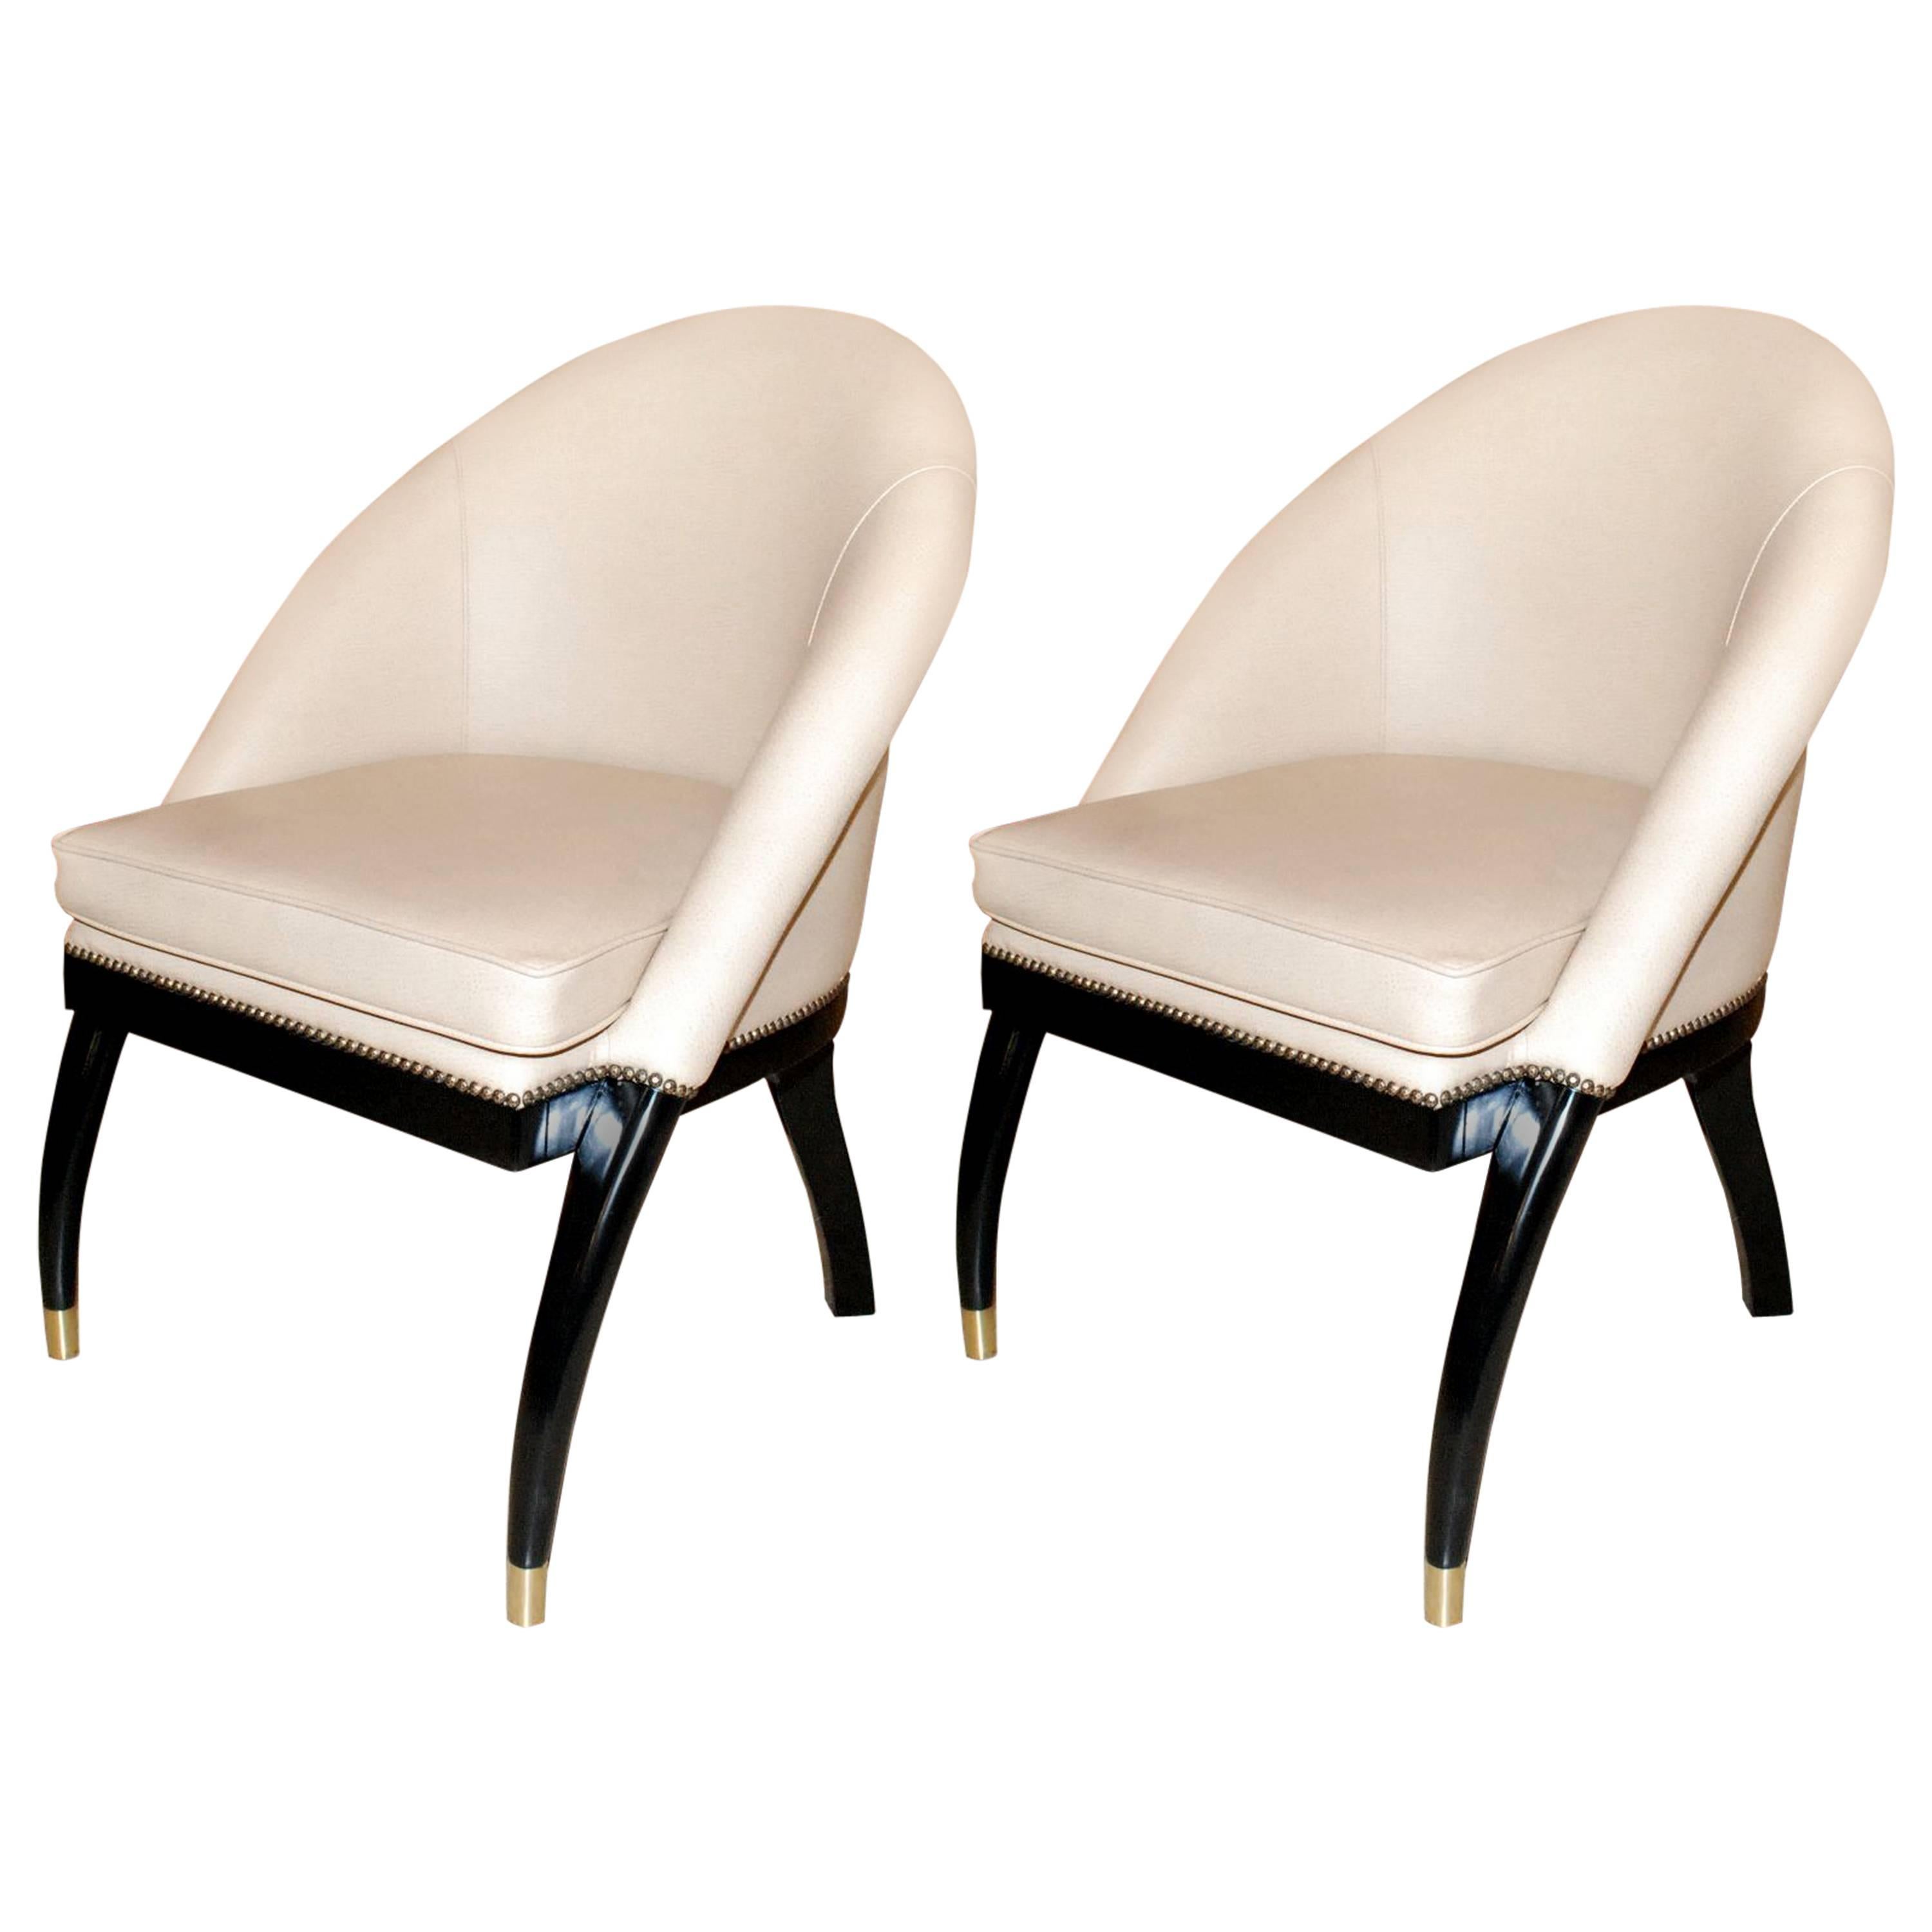 Pair of Side Chairs by Shelby Williams